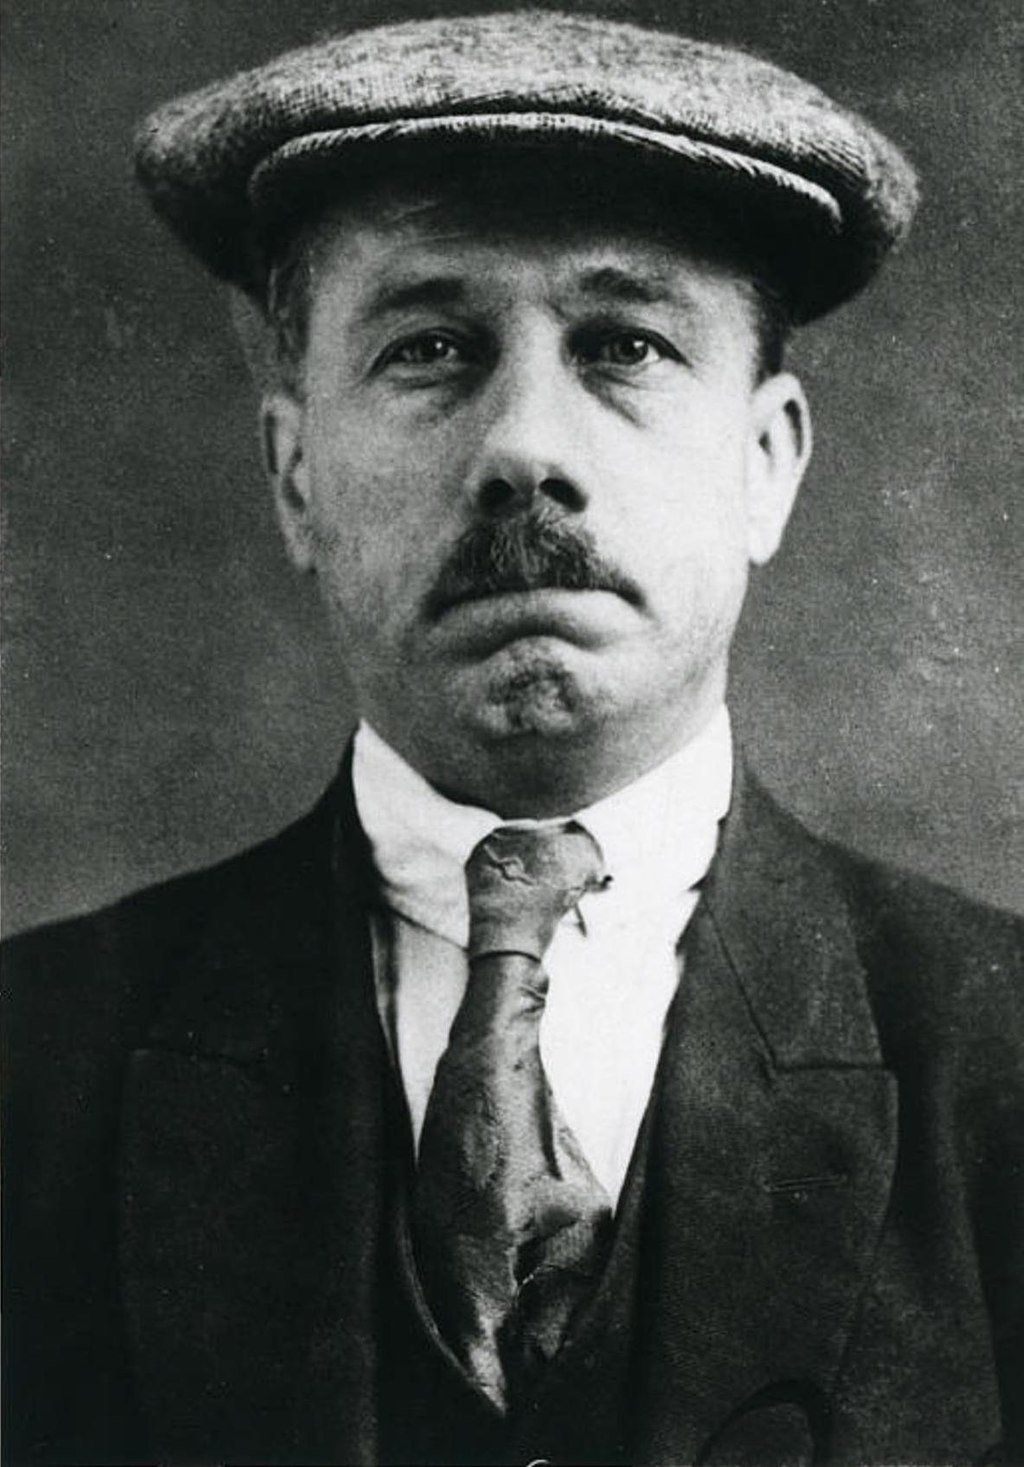 A 1923 mugshot of Red Marut, the most likely candidate for the pseudonym B. Traven